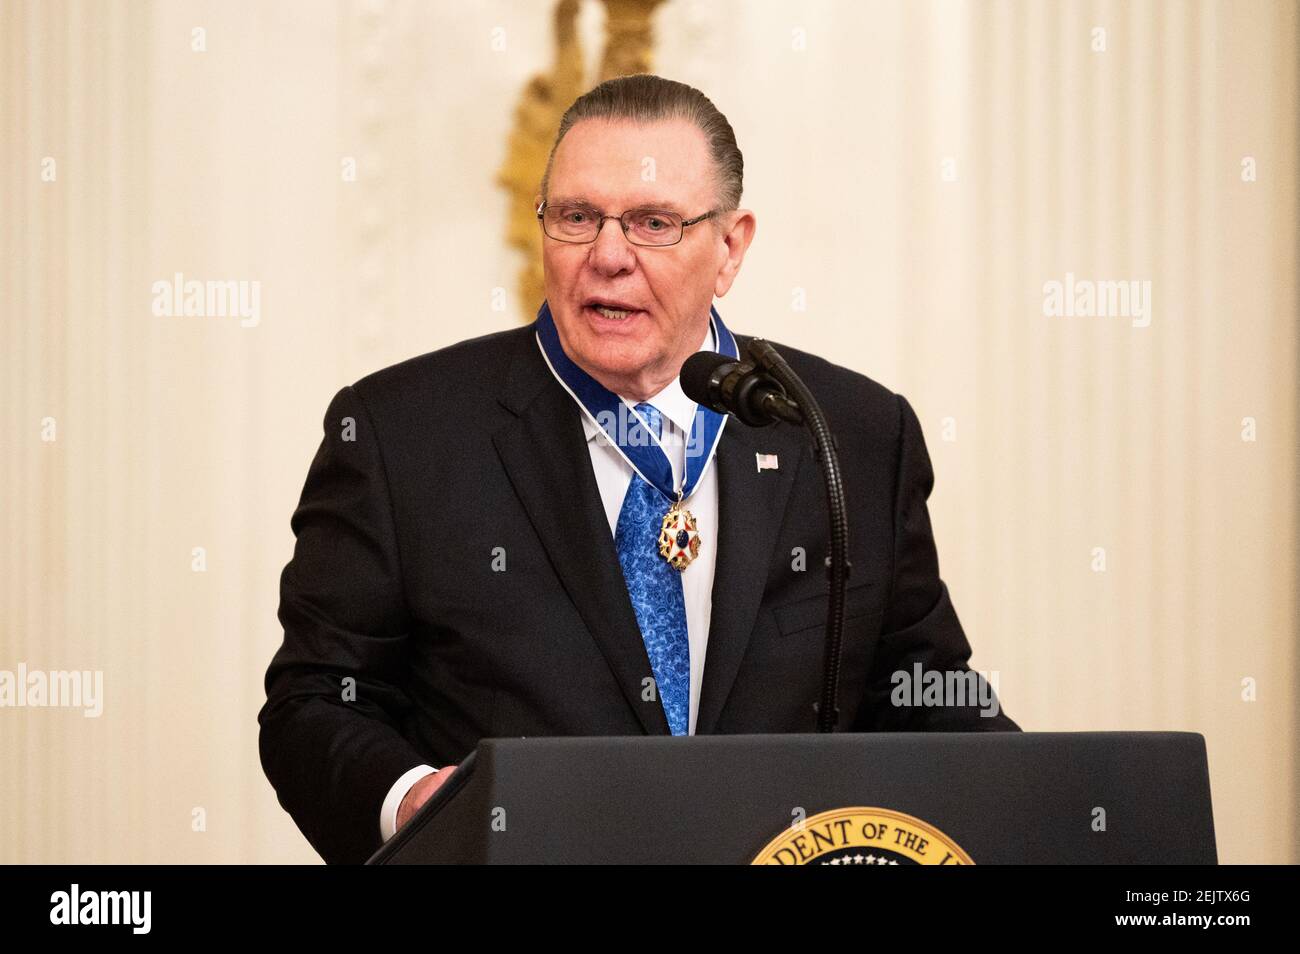 March 10, 2020 - Washington, DC, United States: General Jack Keane at the presentation of the Presidential Medal of Freedom to General Jack Keane. (Photo by Michael Brochstein/Sipa USA) Stock Photo